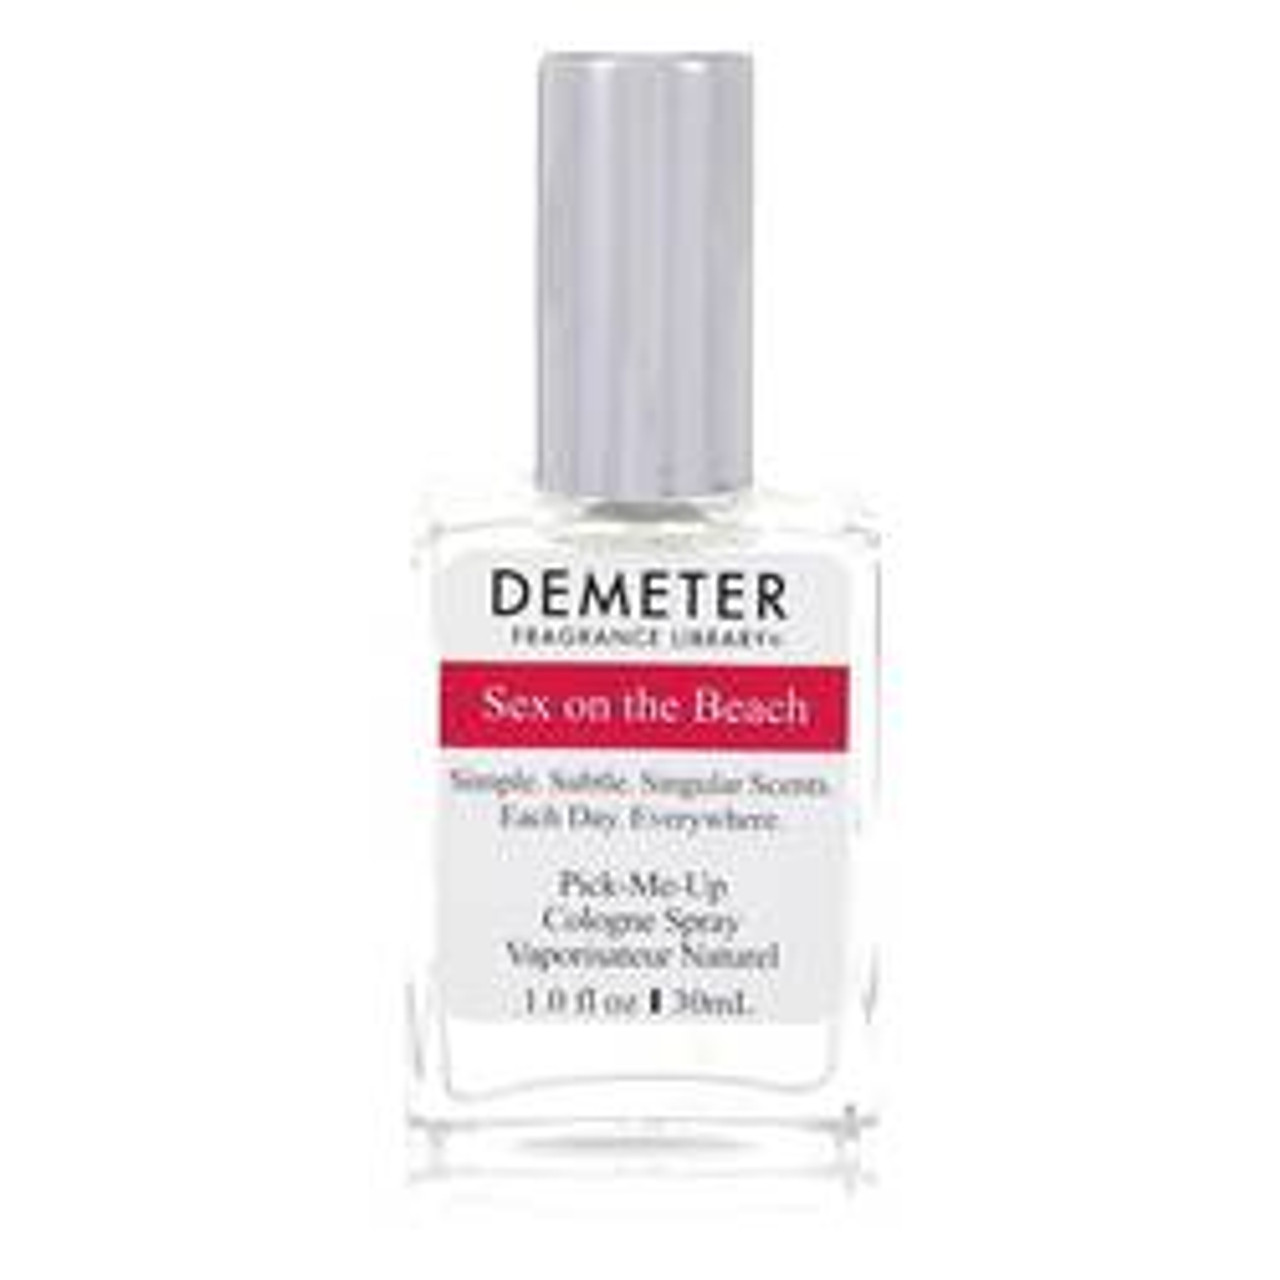 Demeter Sex On The Beach Perfume By Demeter Cologne Spray 1 oz for Women - [From 35.00 - Choose pk Qty ] - *Ships from Miami